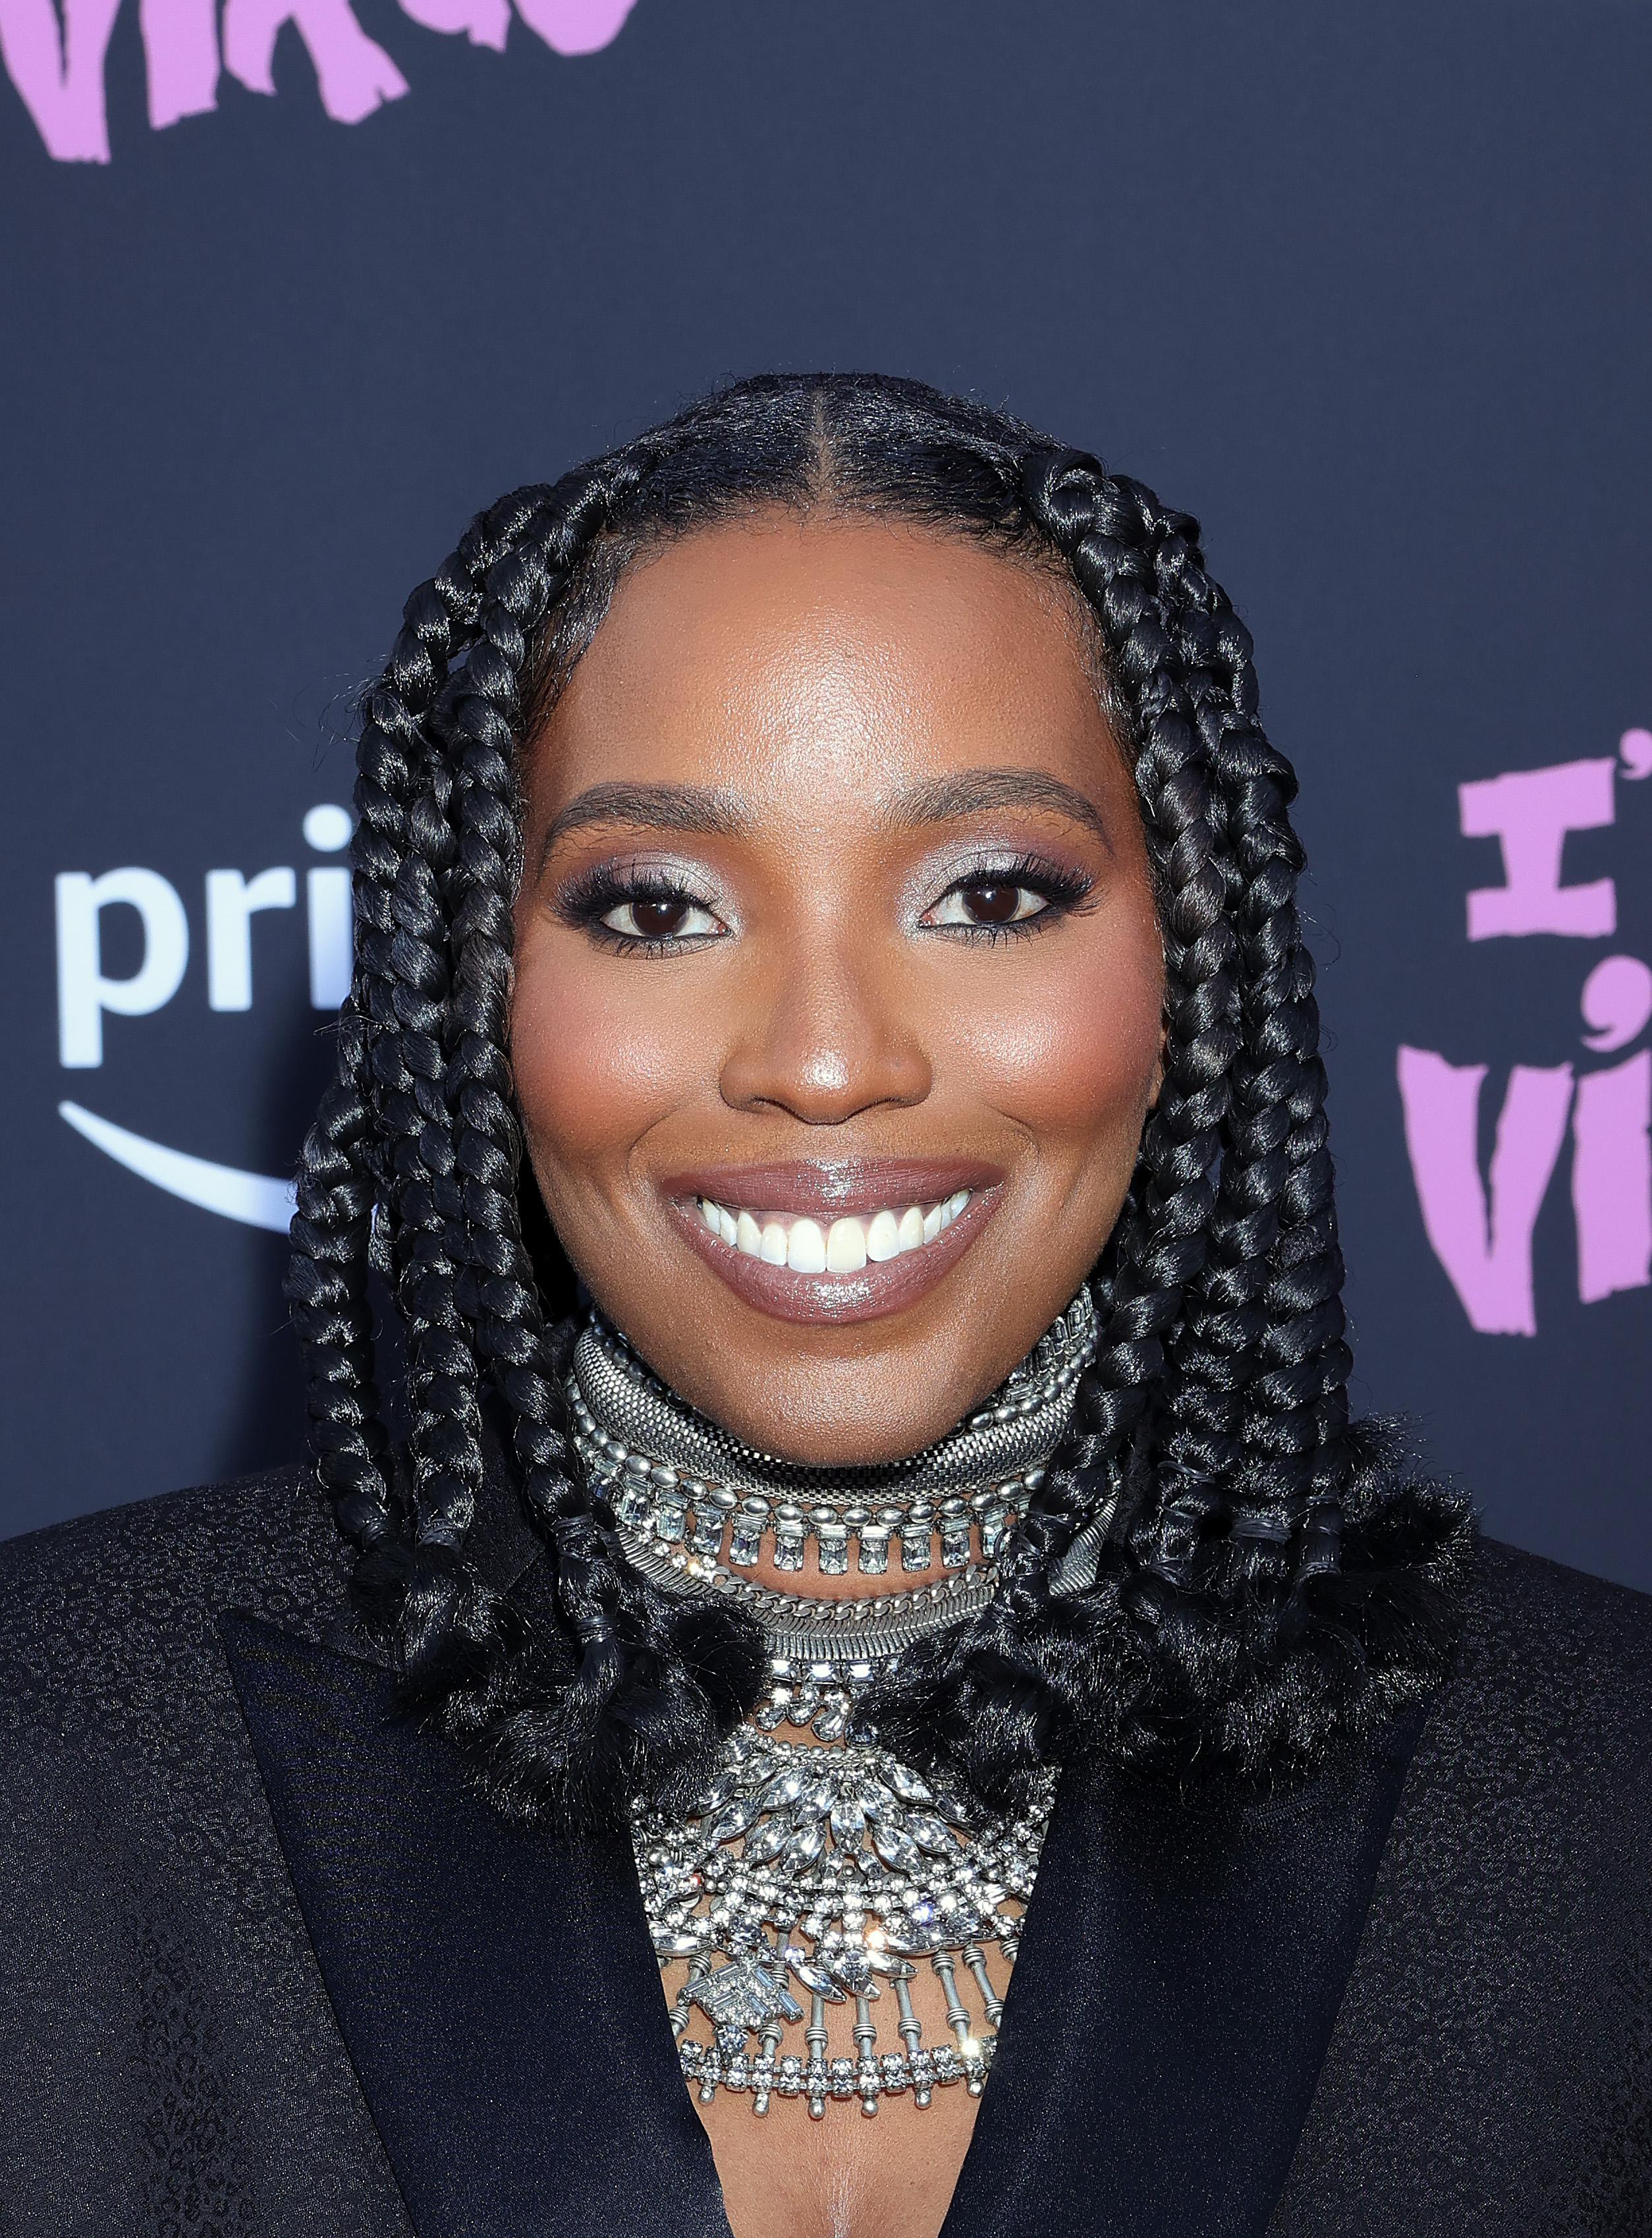 Olivia Washington at the "I'm A Virgo" premiere screening and after-party in Los Angeles, California on June 21, 2023 | Source: Getty Images